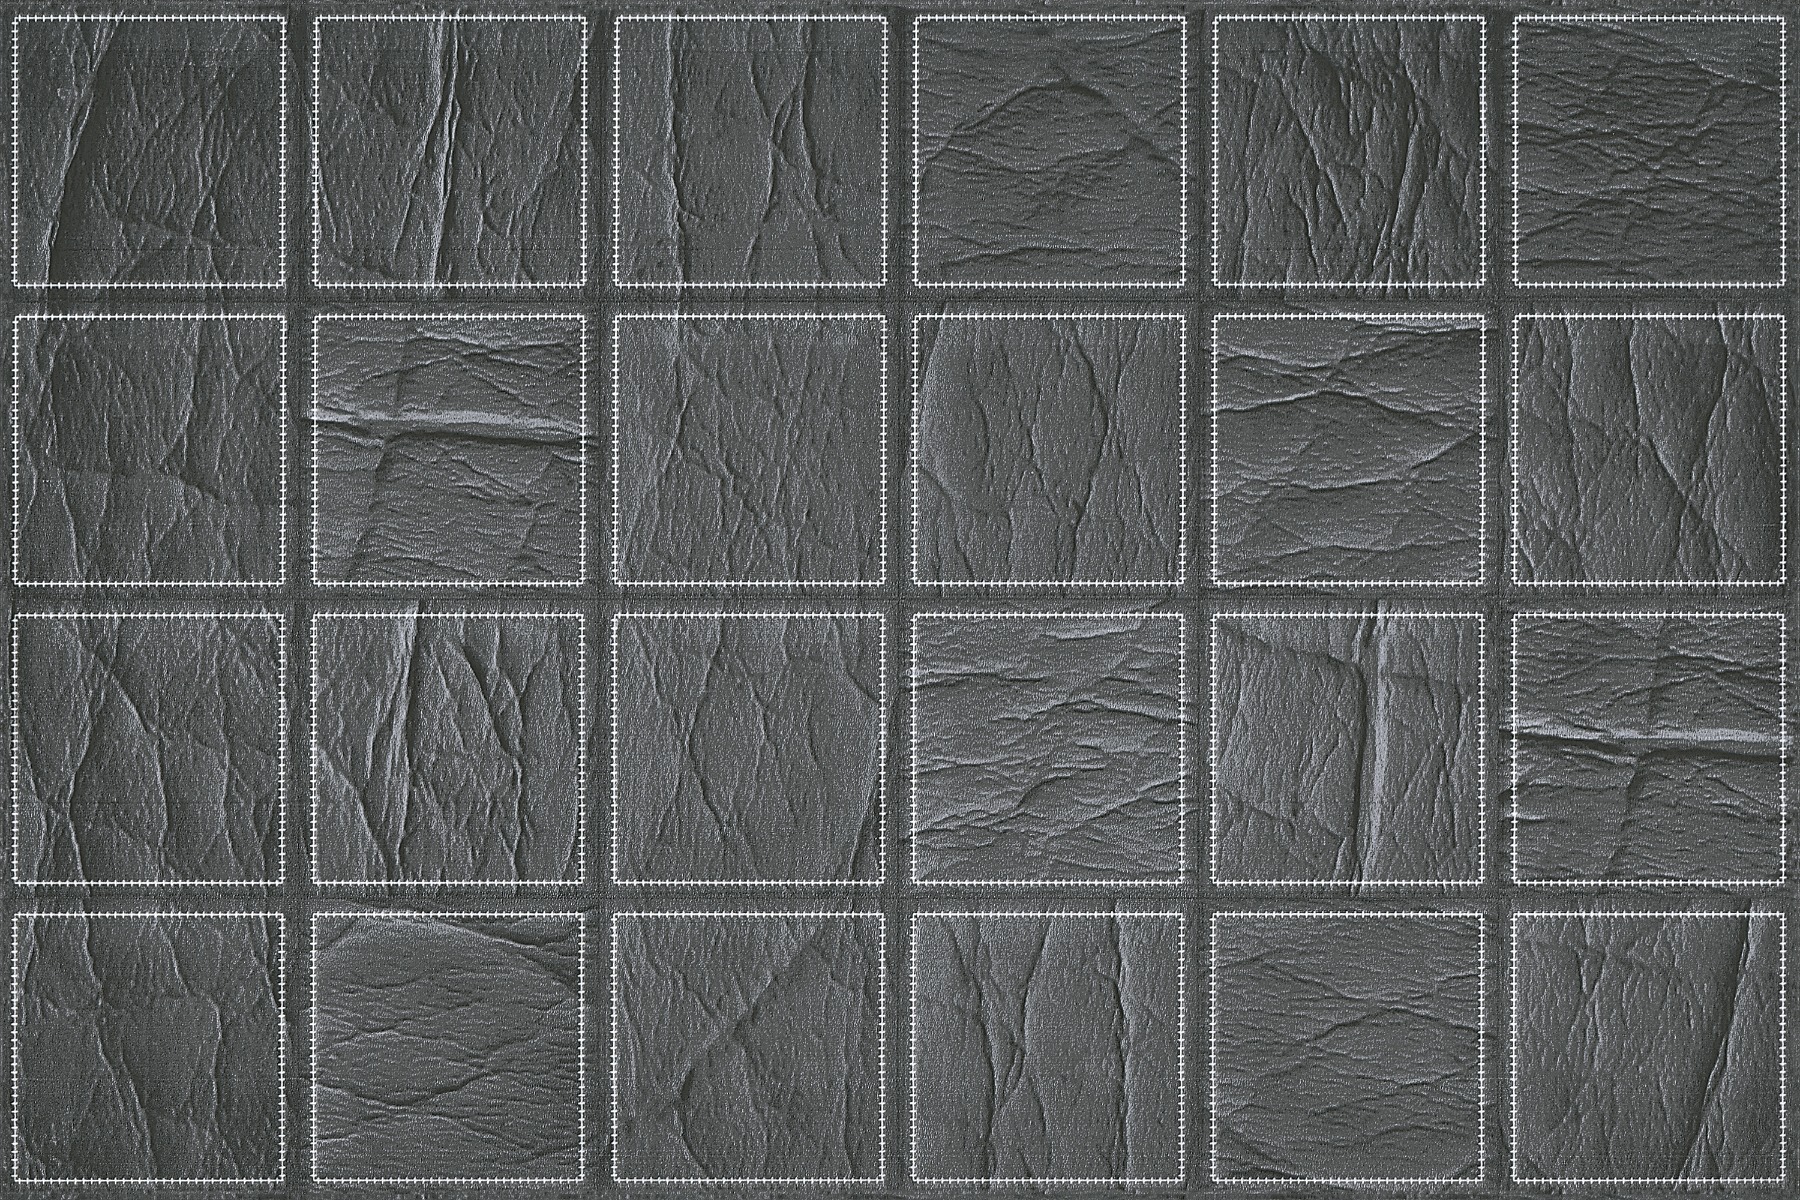 Designer Glass Mosaic Tiles for Floor & Wall at the Best Price in